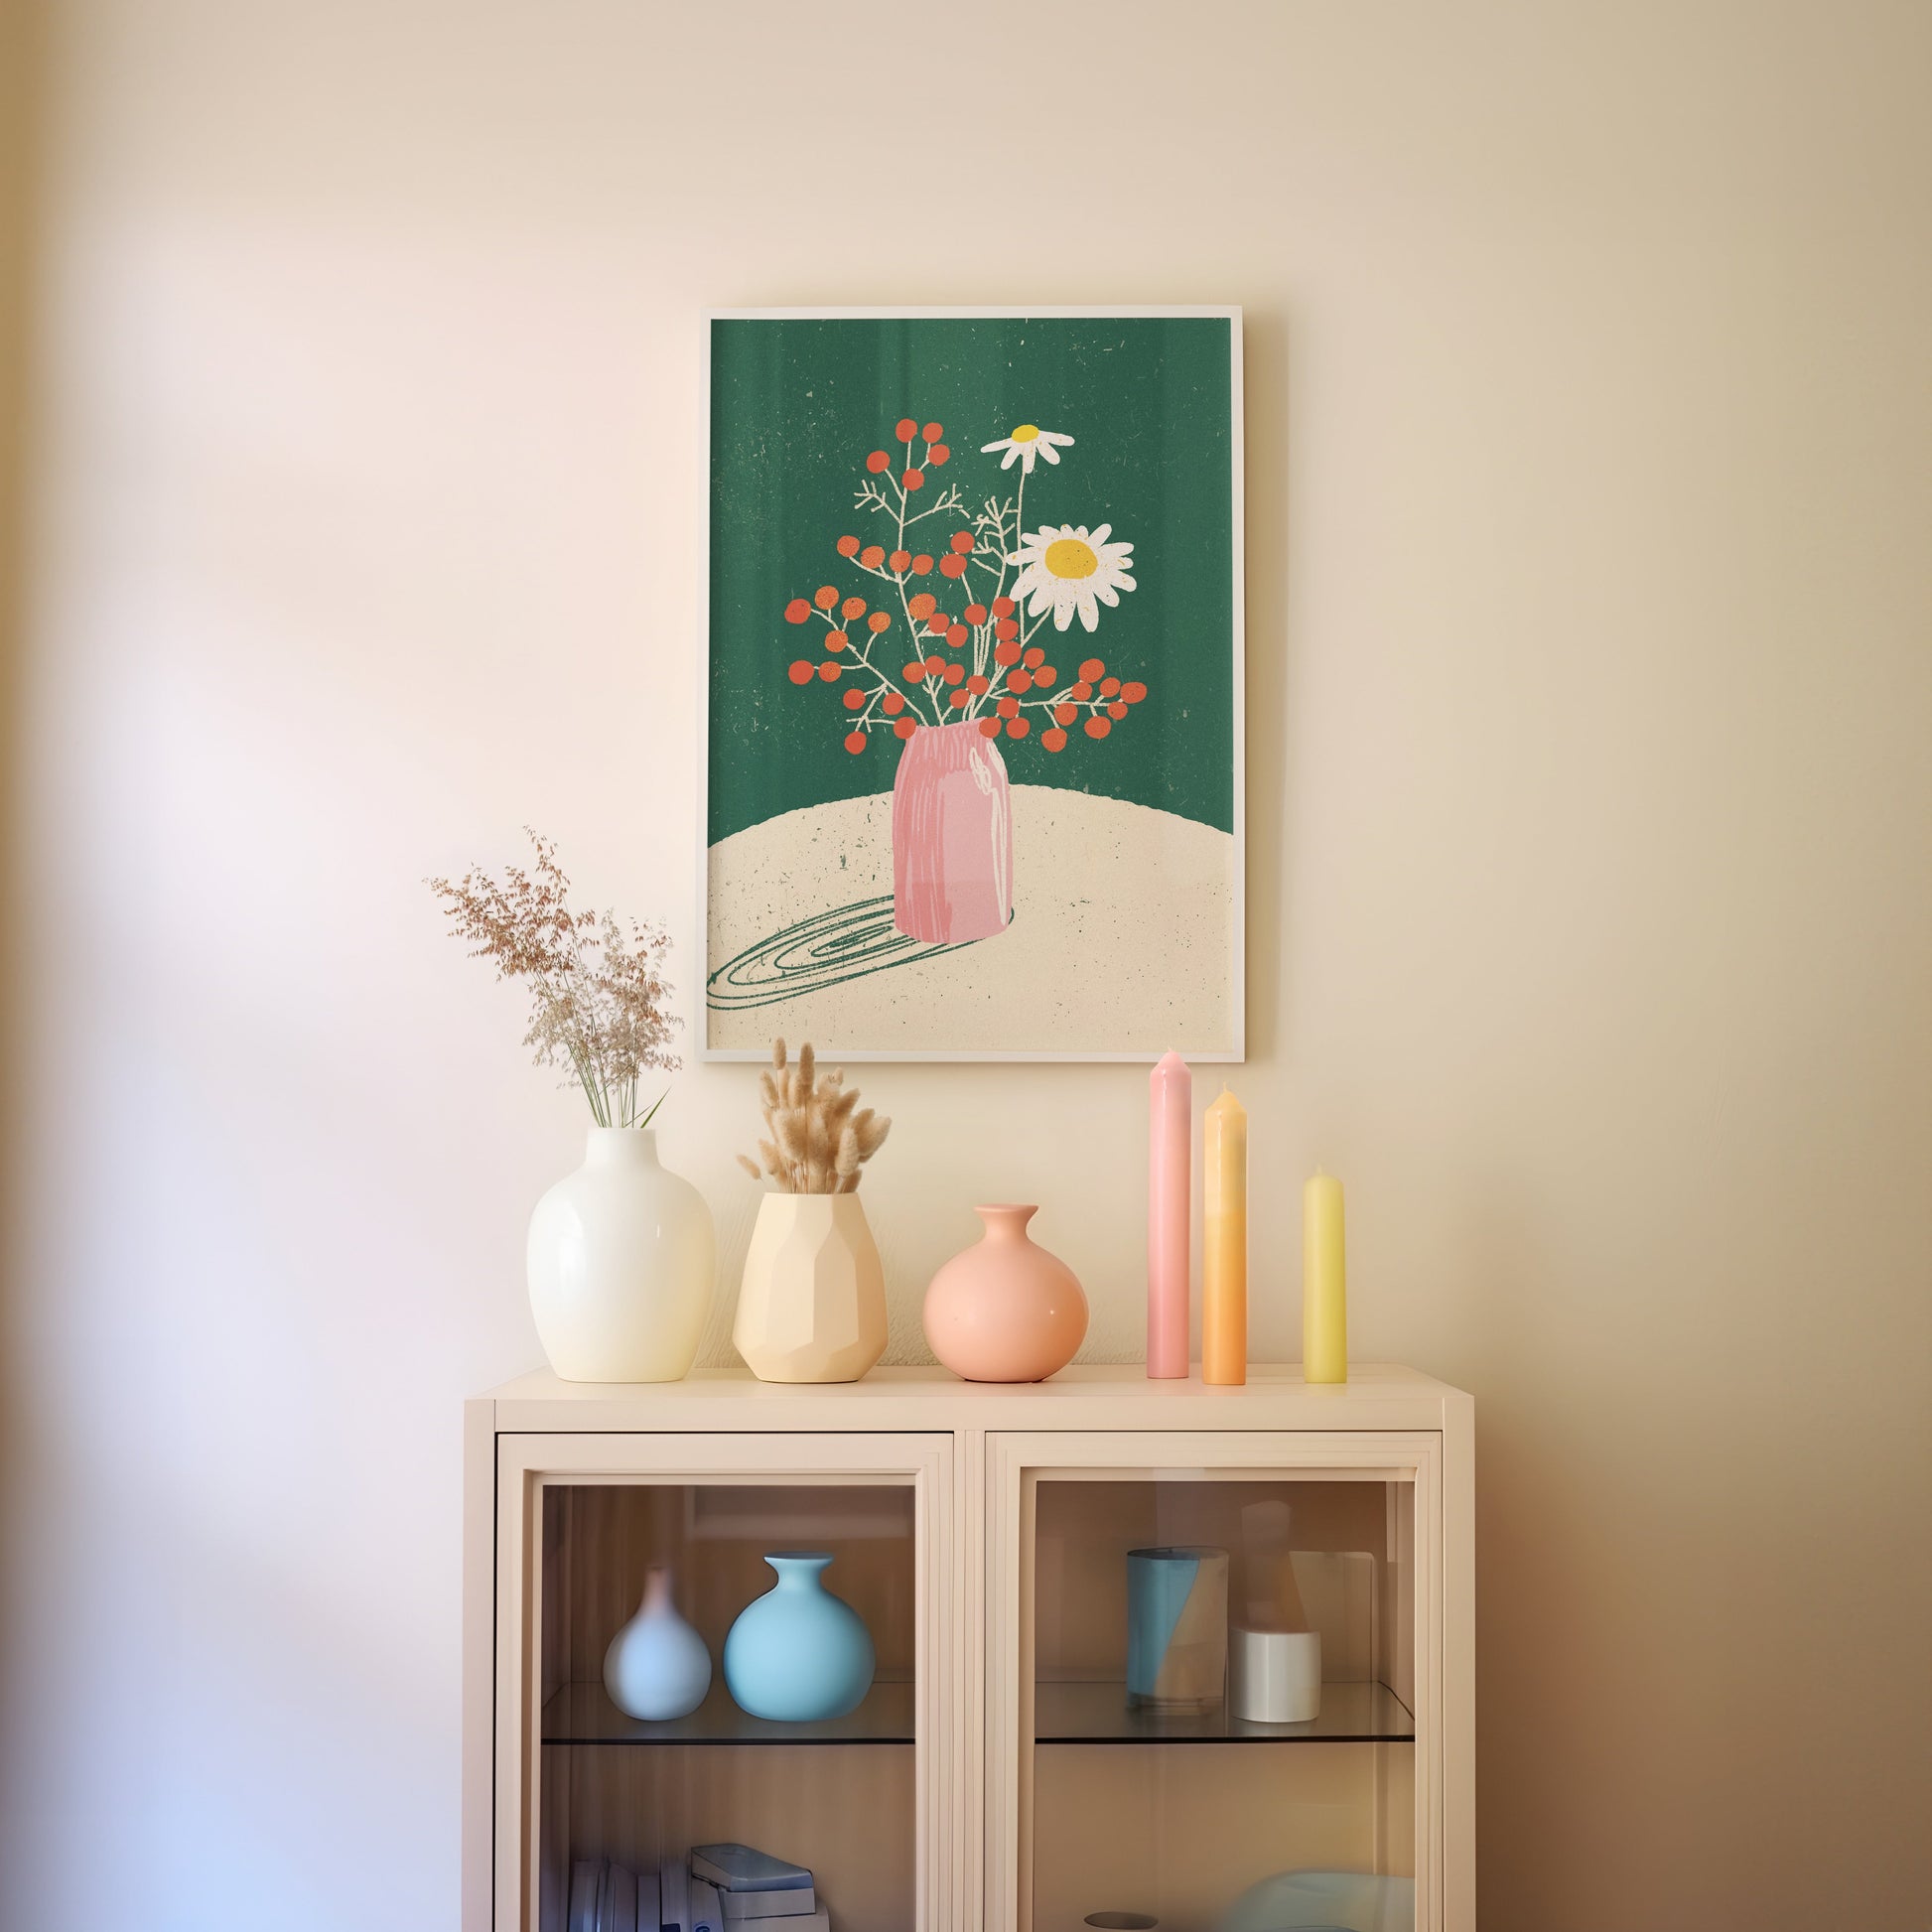 a shelf with vases and a painting on it